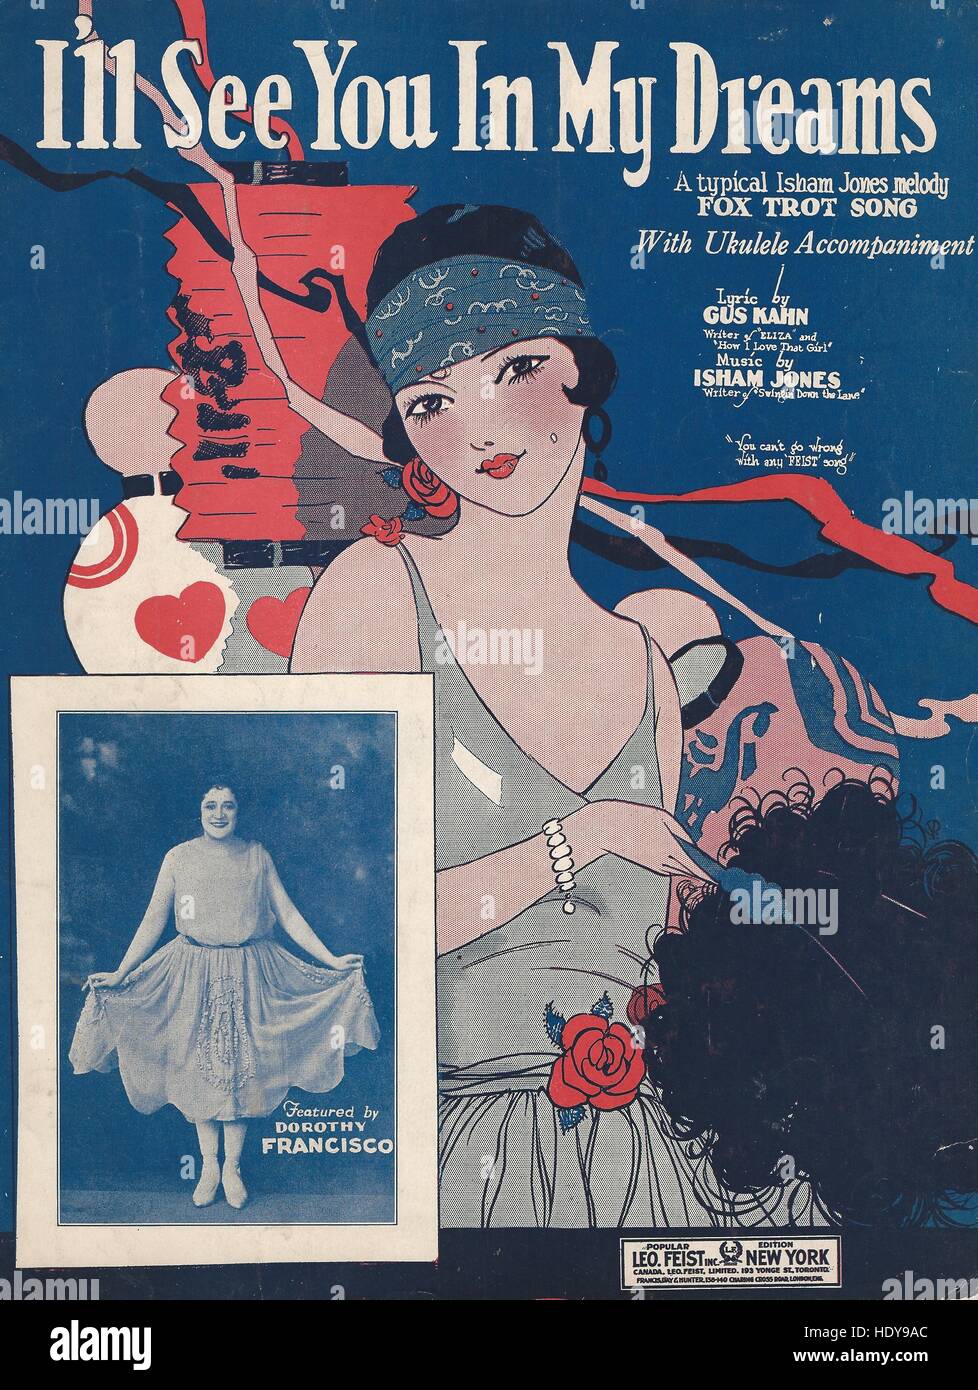 I Ll See You In My Dreams 1924 Sheet Music Cover Stock Photo Alamy